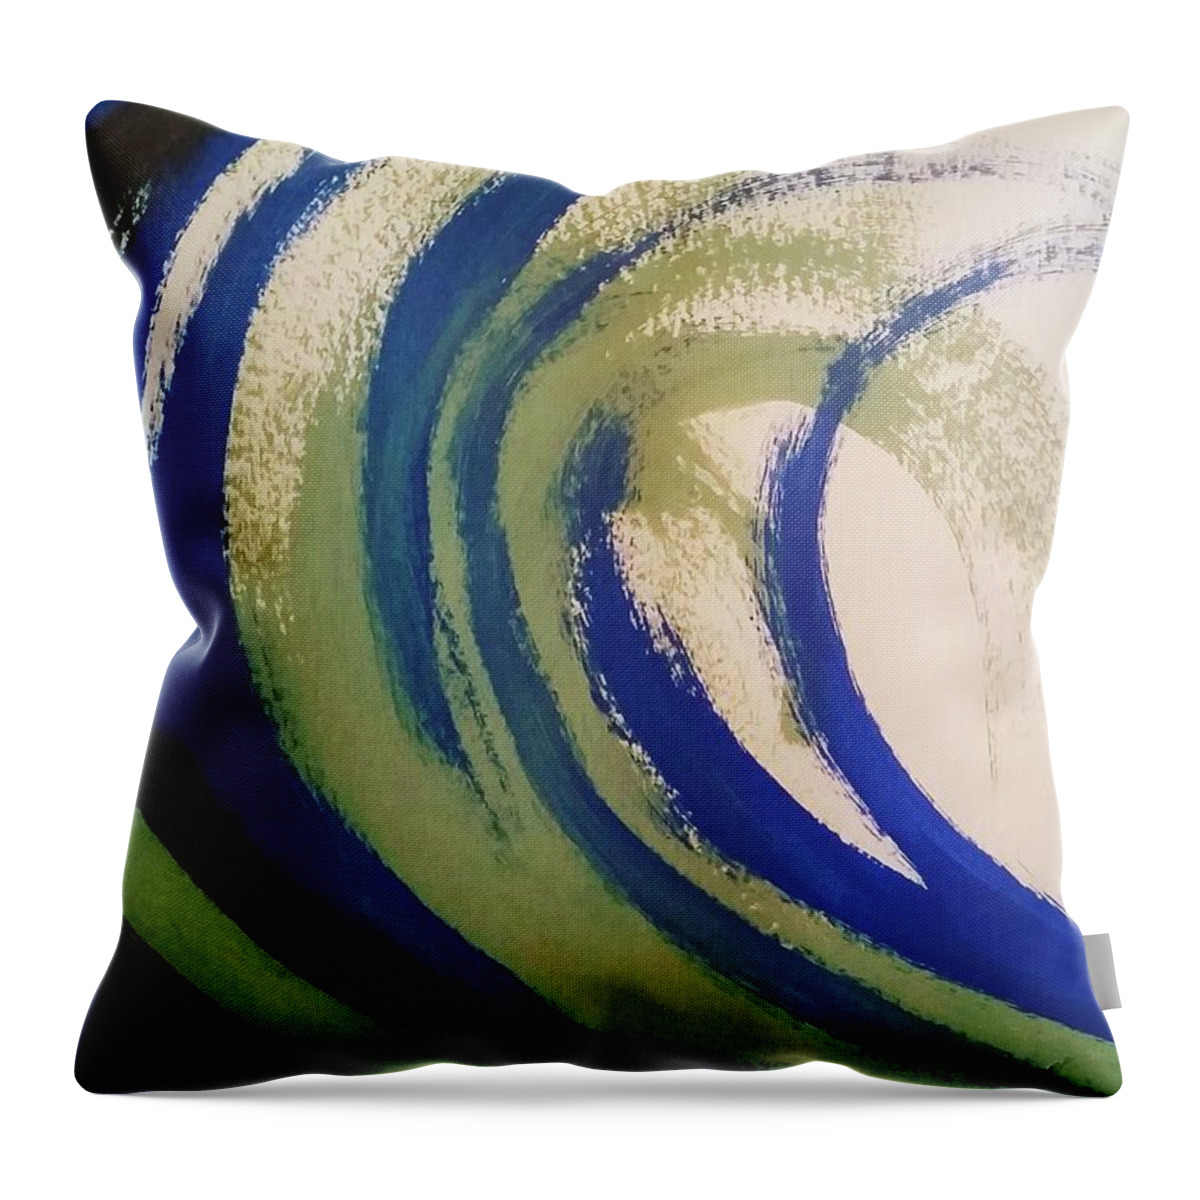 Abstract Throw Pillow featuring the painting Abstract Waves by Vale Anoa'i